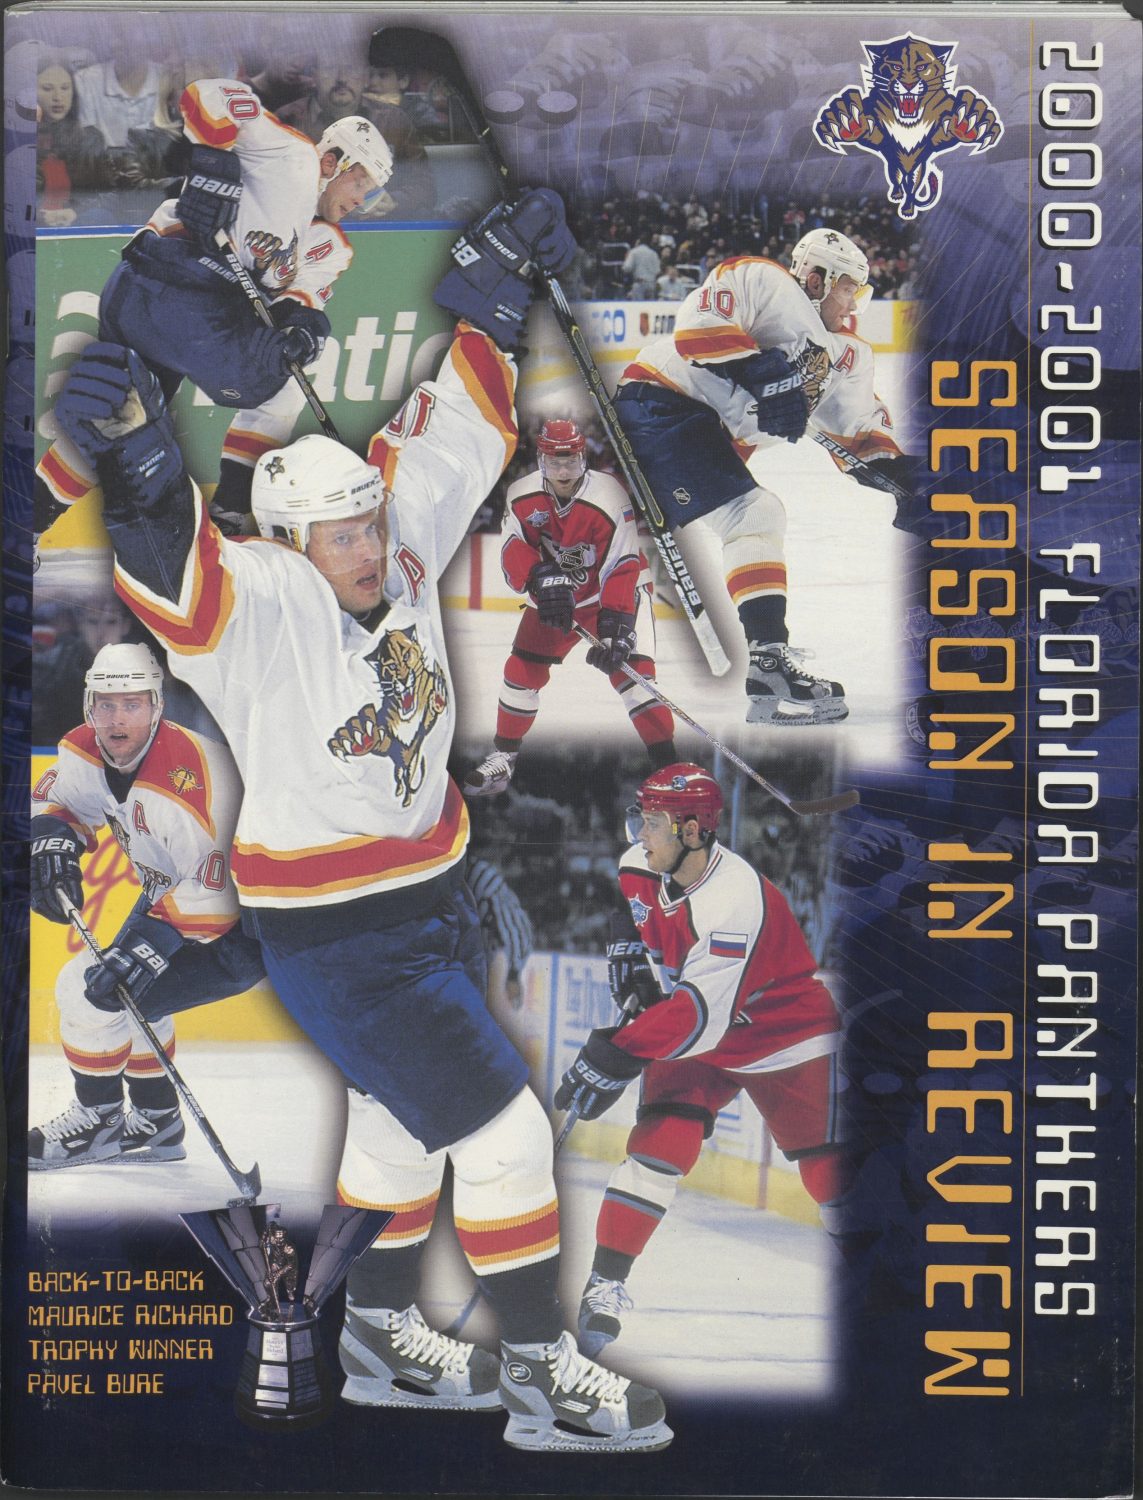 Pavel Bure - Panthers Den of Honor